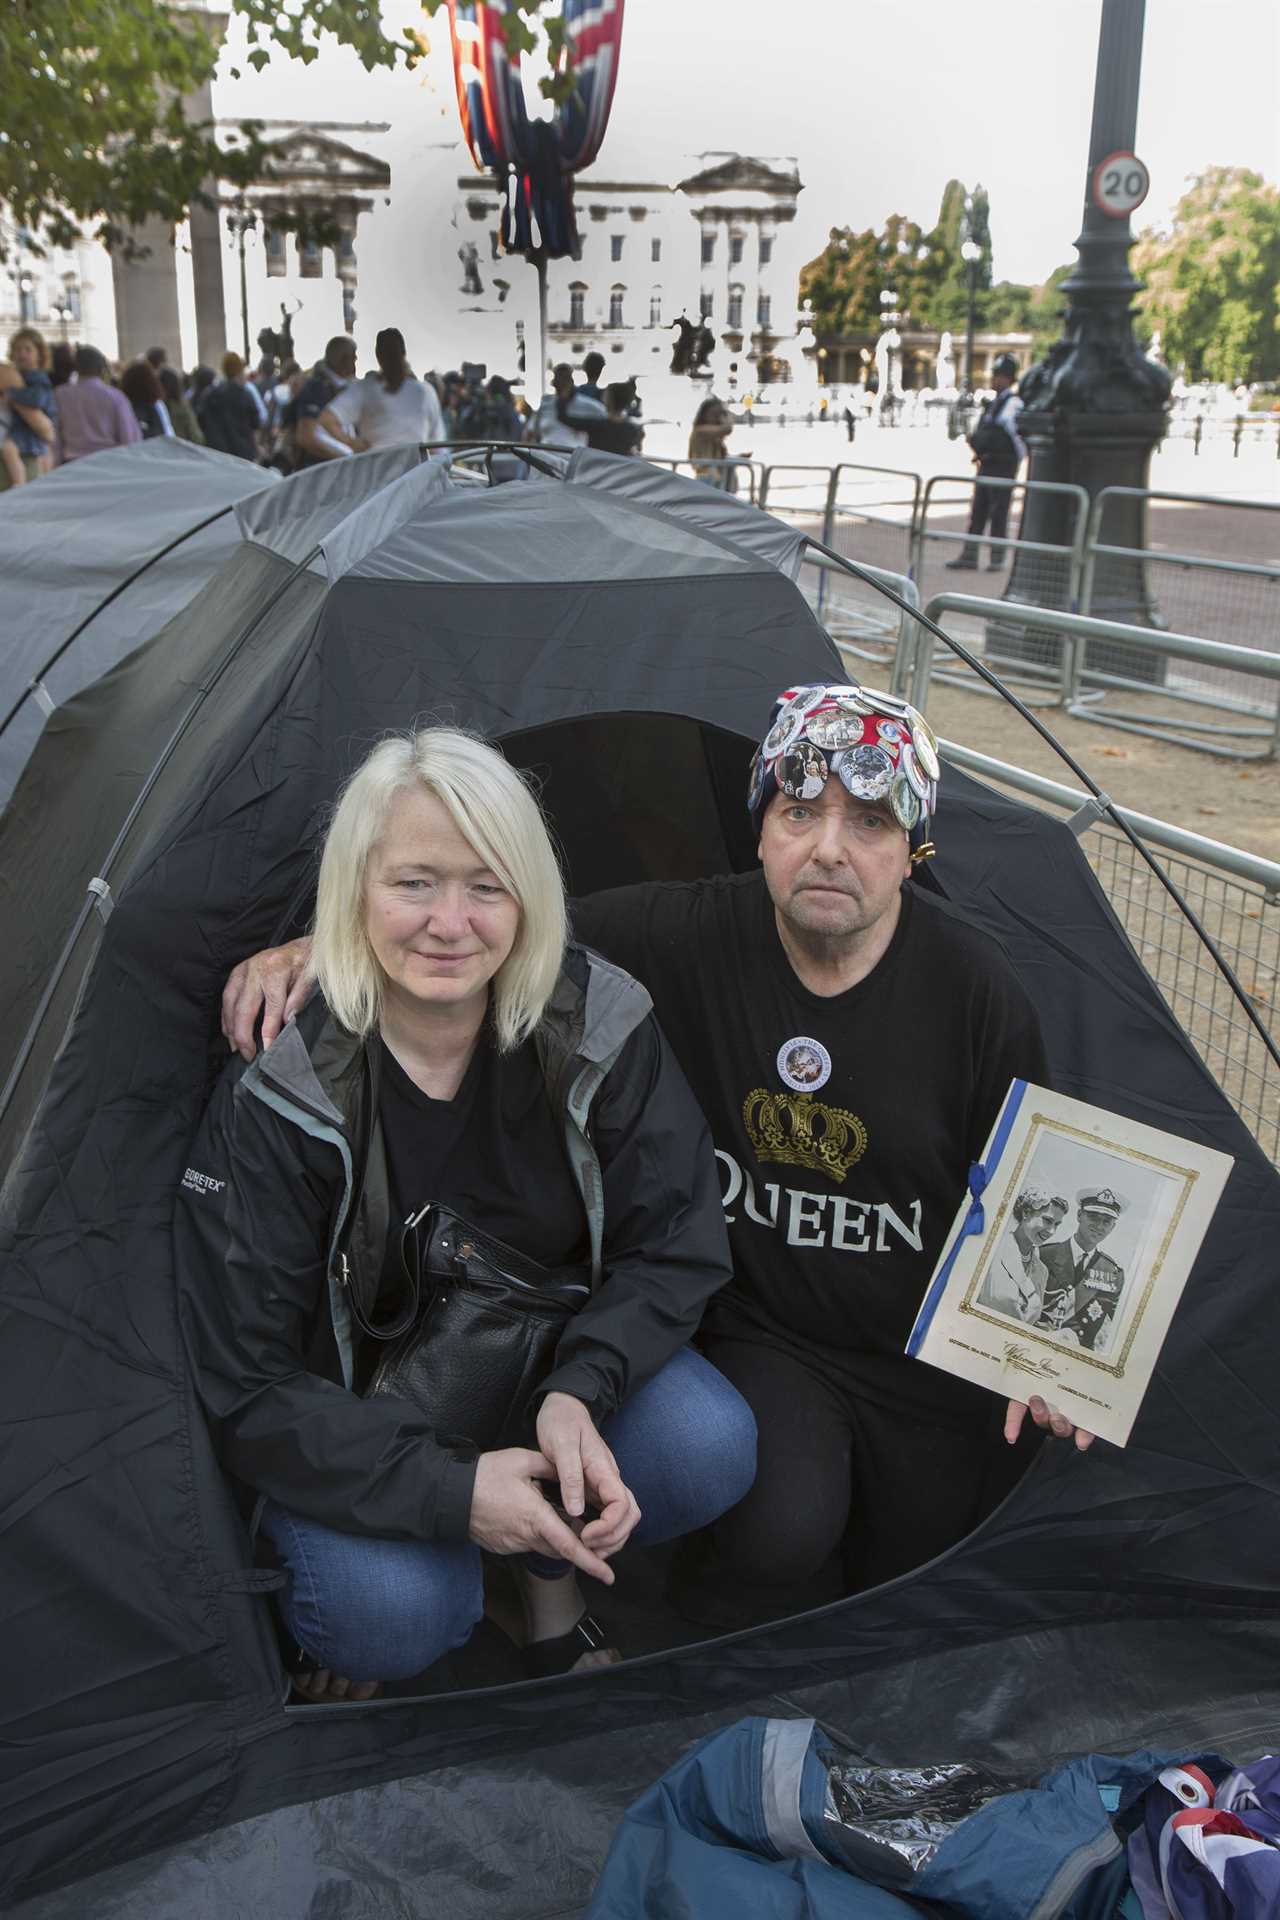 We’re camping for 10 DAYS outside Buckingham Palace so we get the best view of the Queen’s coffin… we couldn’t miss it